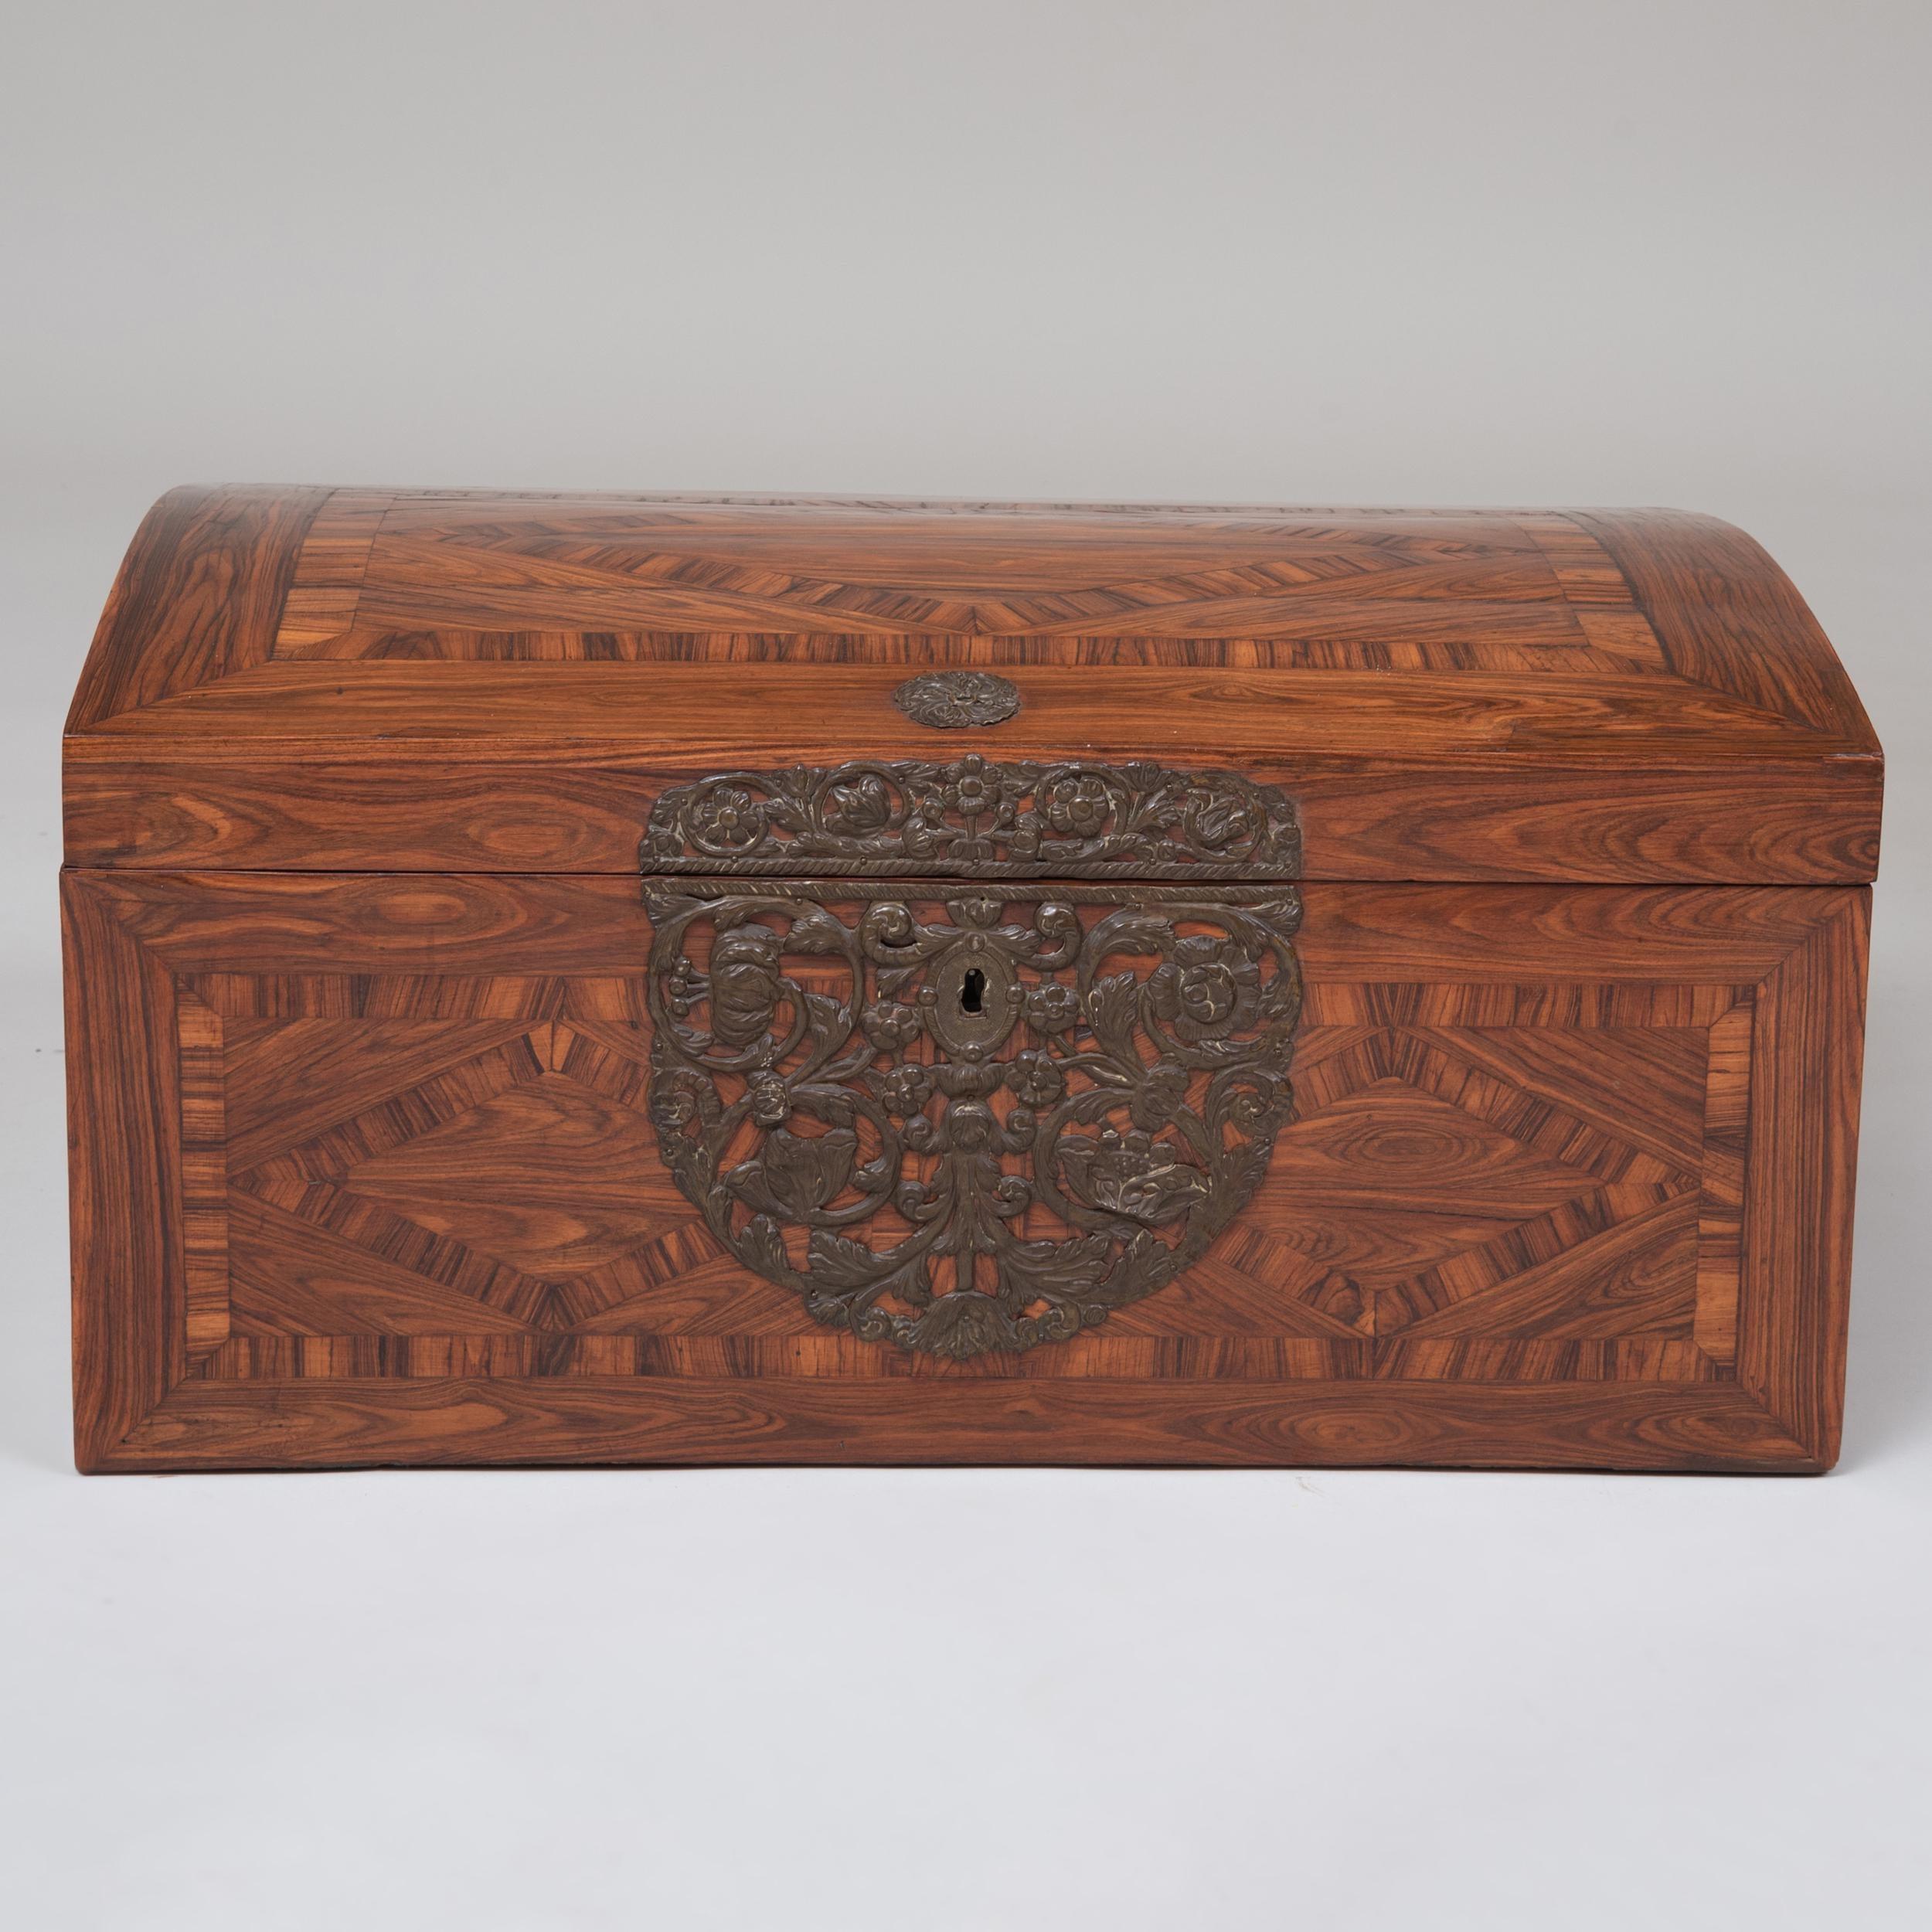 Fine 17th century domed box with highly figured kingwood marquetry veneer laid in a geometric pattern, the front having elaborate pierced and embossed brass escutcheon, the whole with pleasing grain and patina, now with (older) velvet lining.